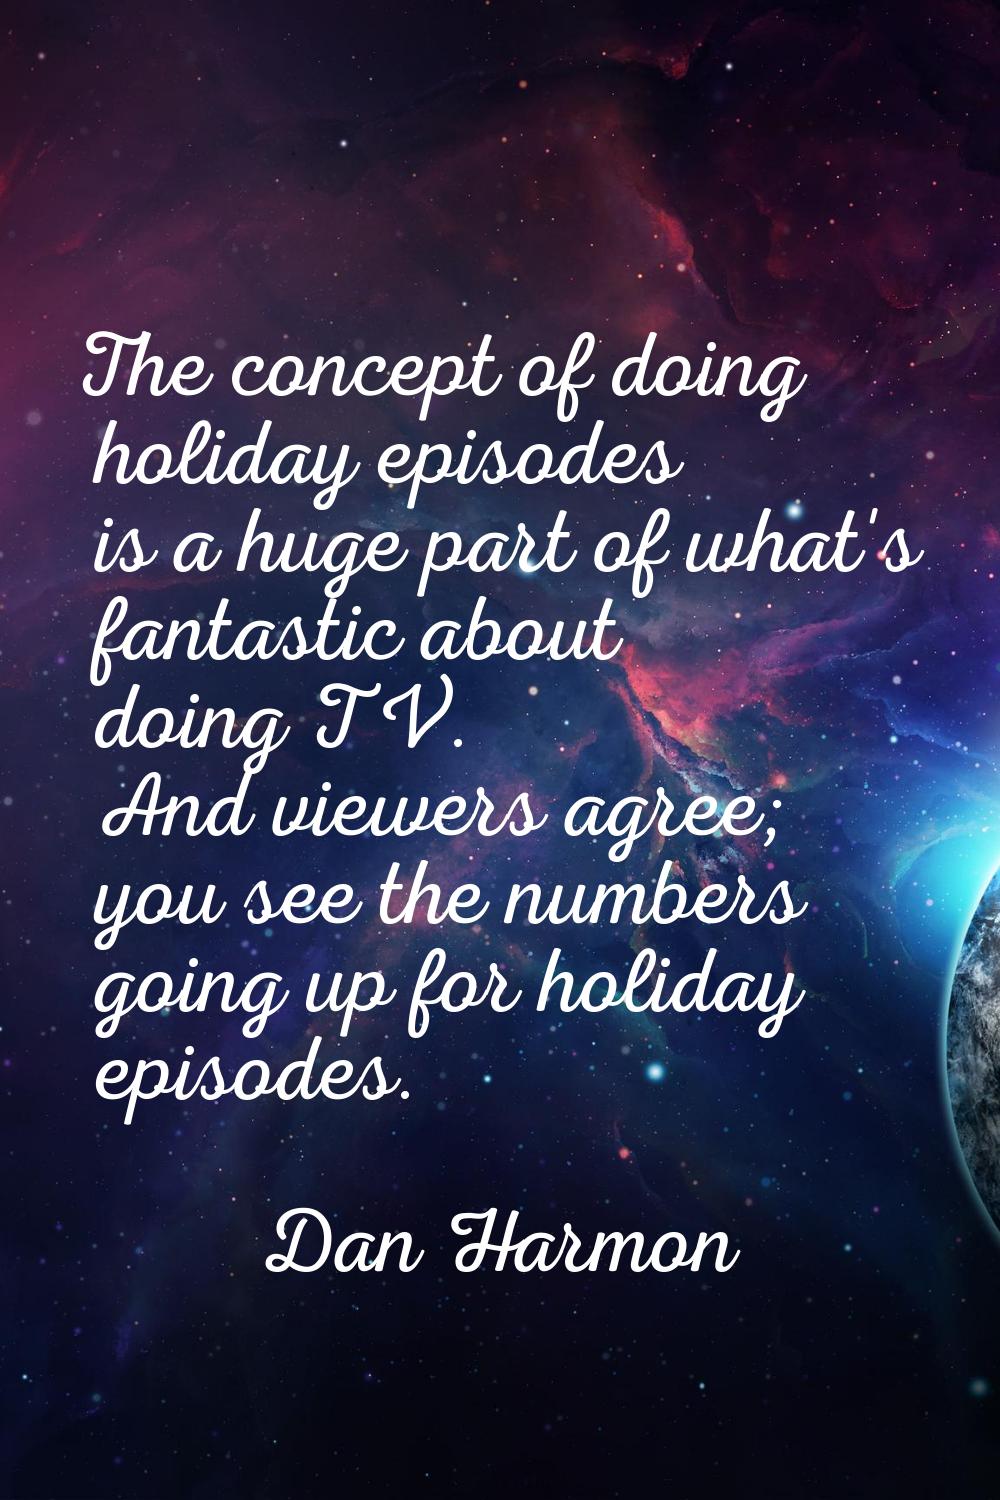 The concept of doing holiday episodes is a huge part of what's fantastic about doing TV. And viewer